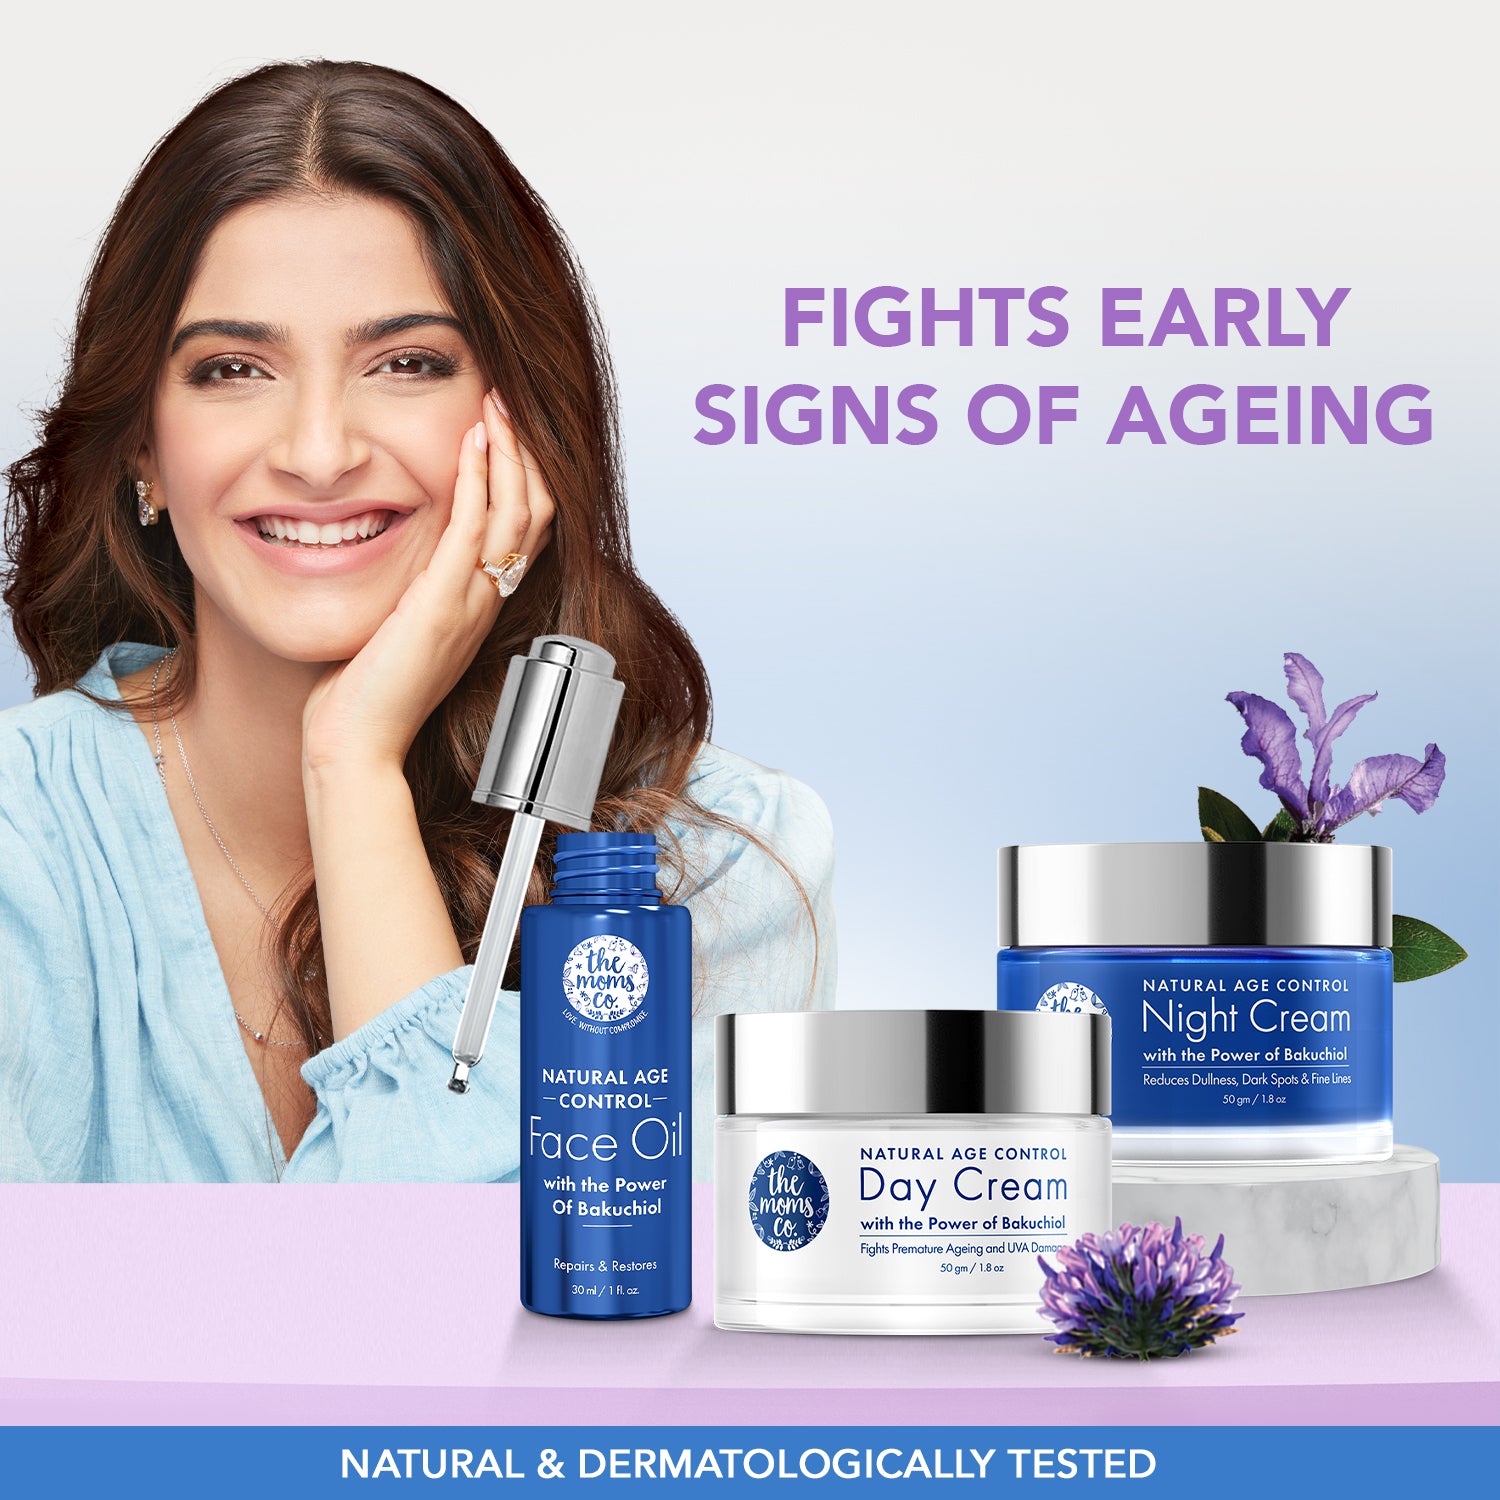 The Moms Co Natural Age Control Under Eye Cream l Reduce Fine Lines, Wrinkles & Dark Circles l Anti Ageing with Natural Retinol and Niacinamide (25 gm